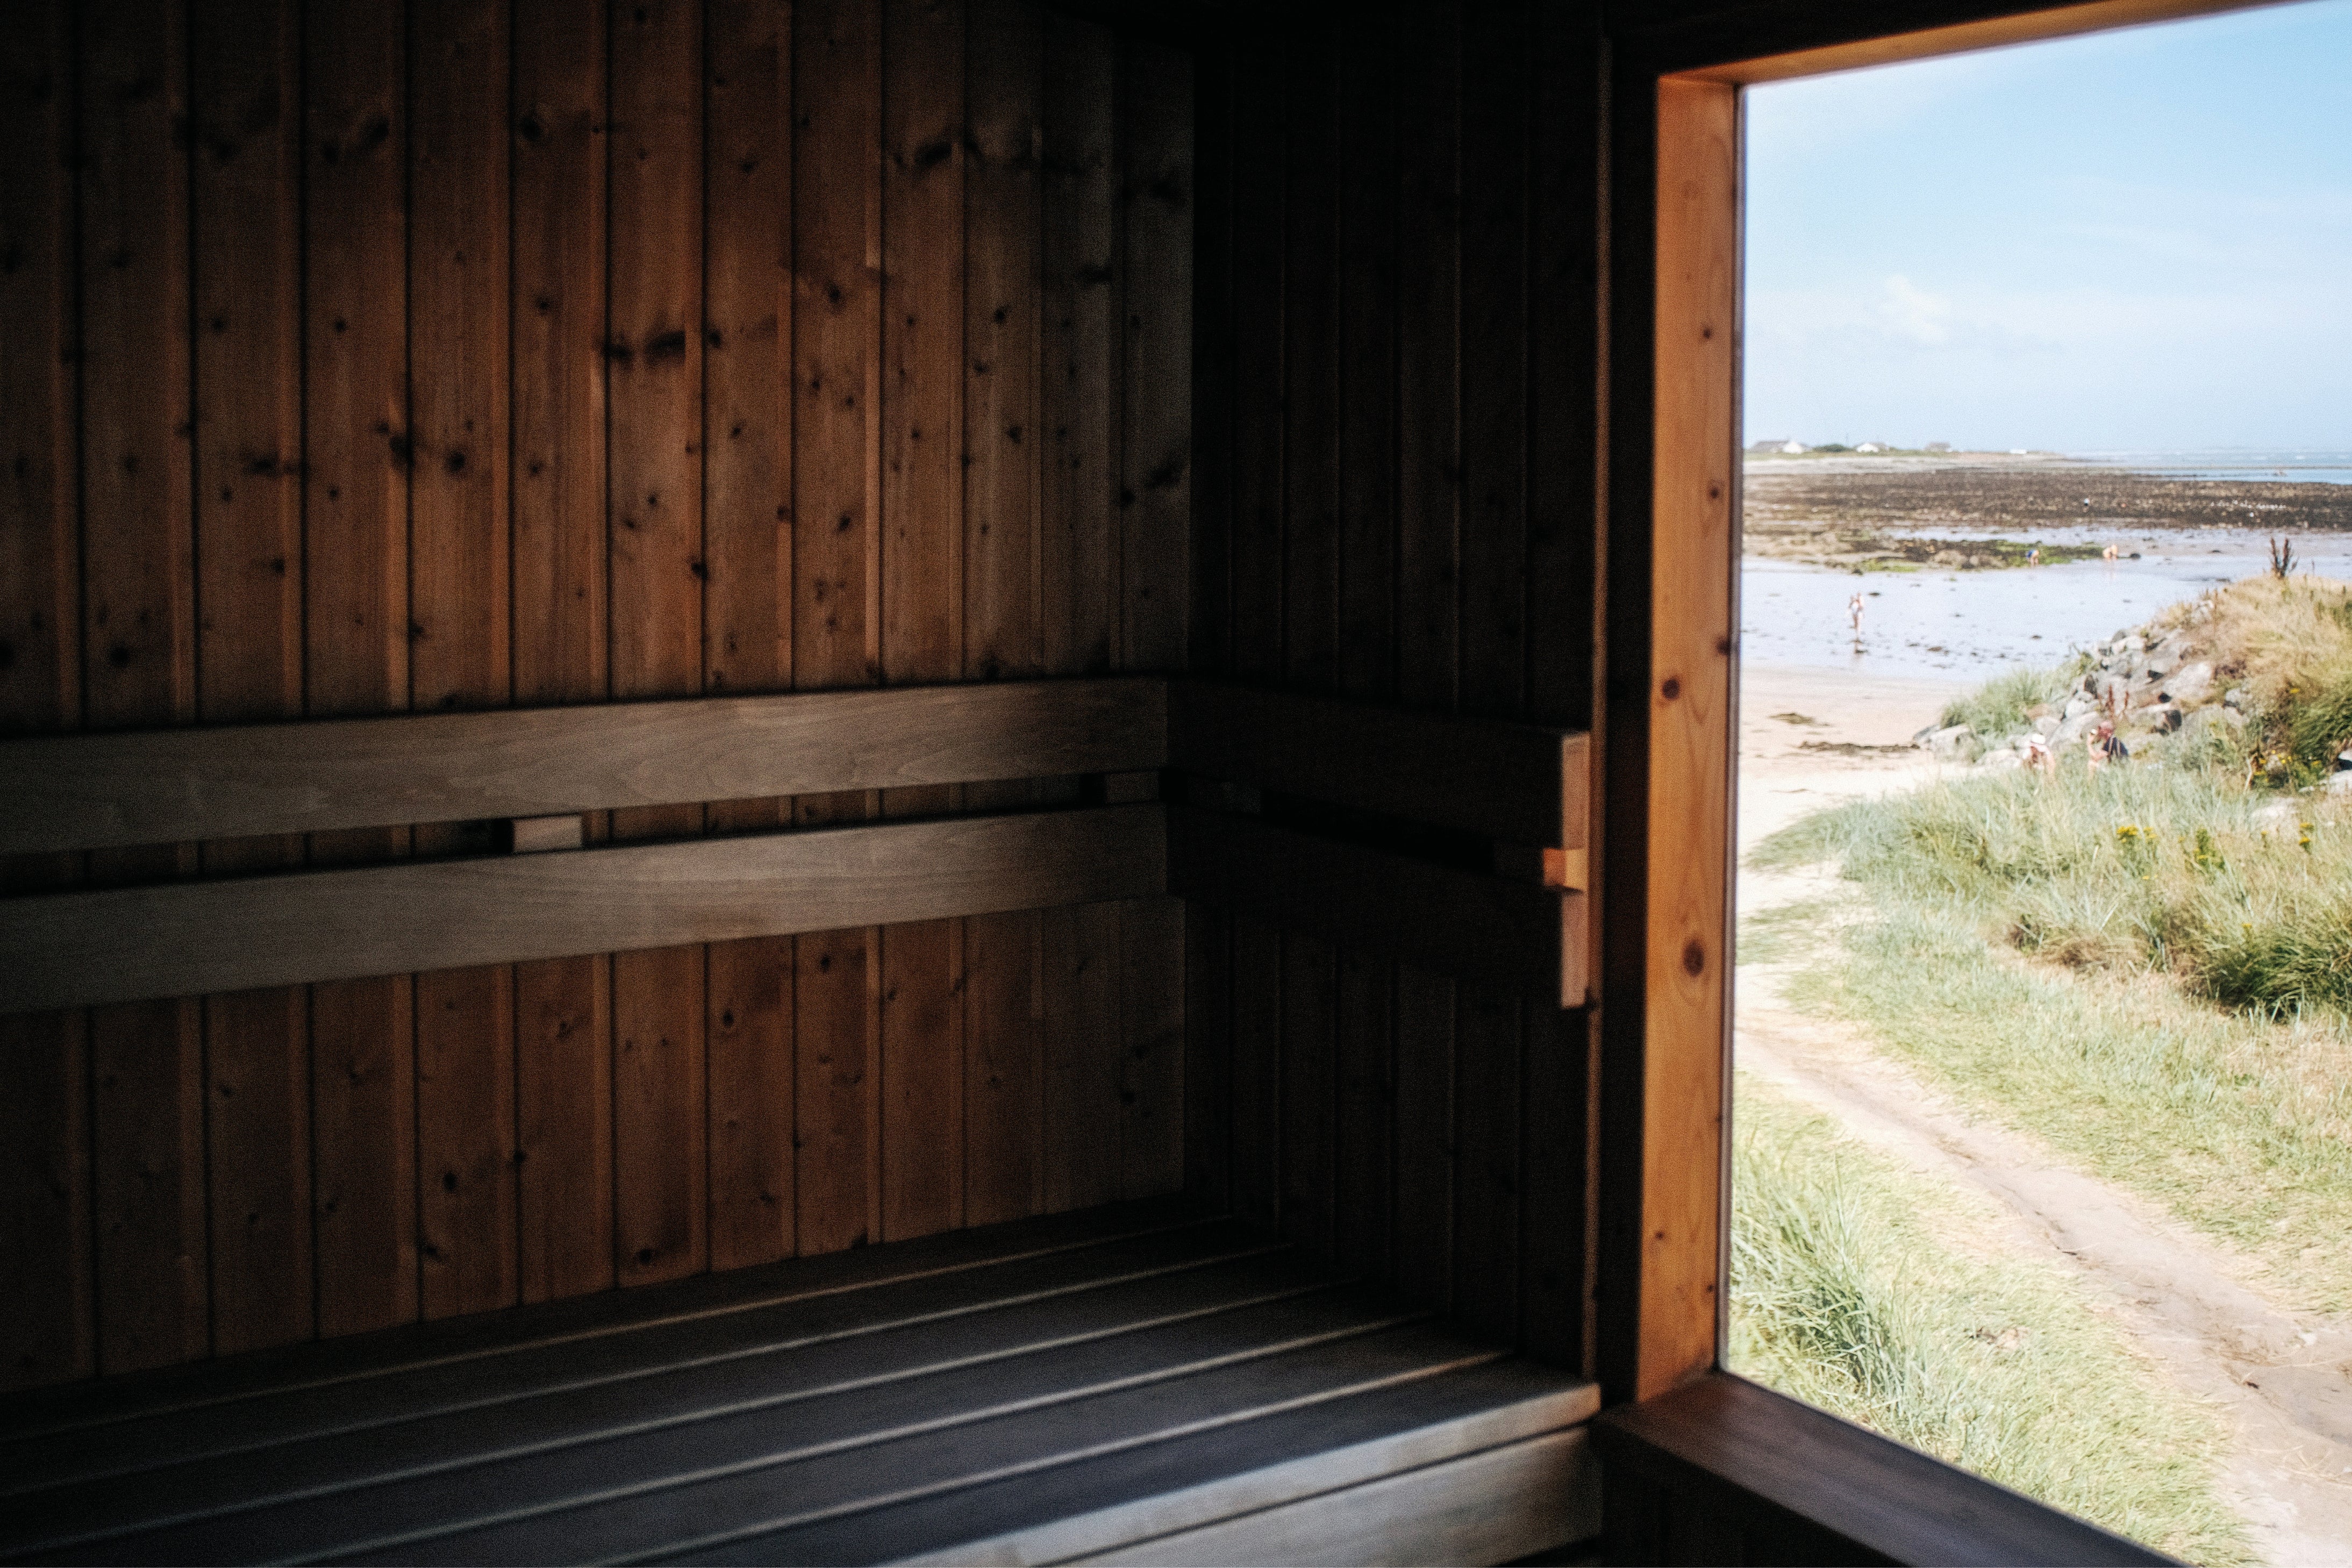 Heating up: the rise of sauna culture